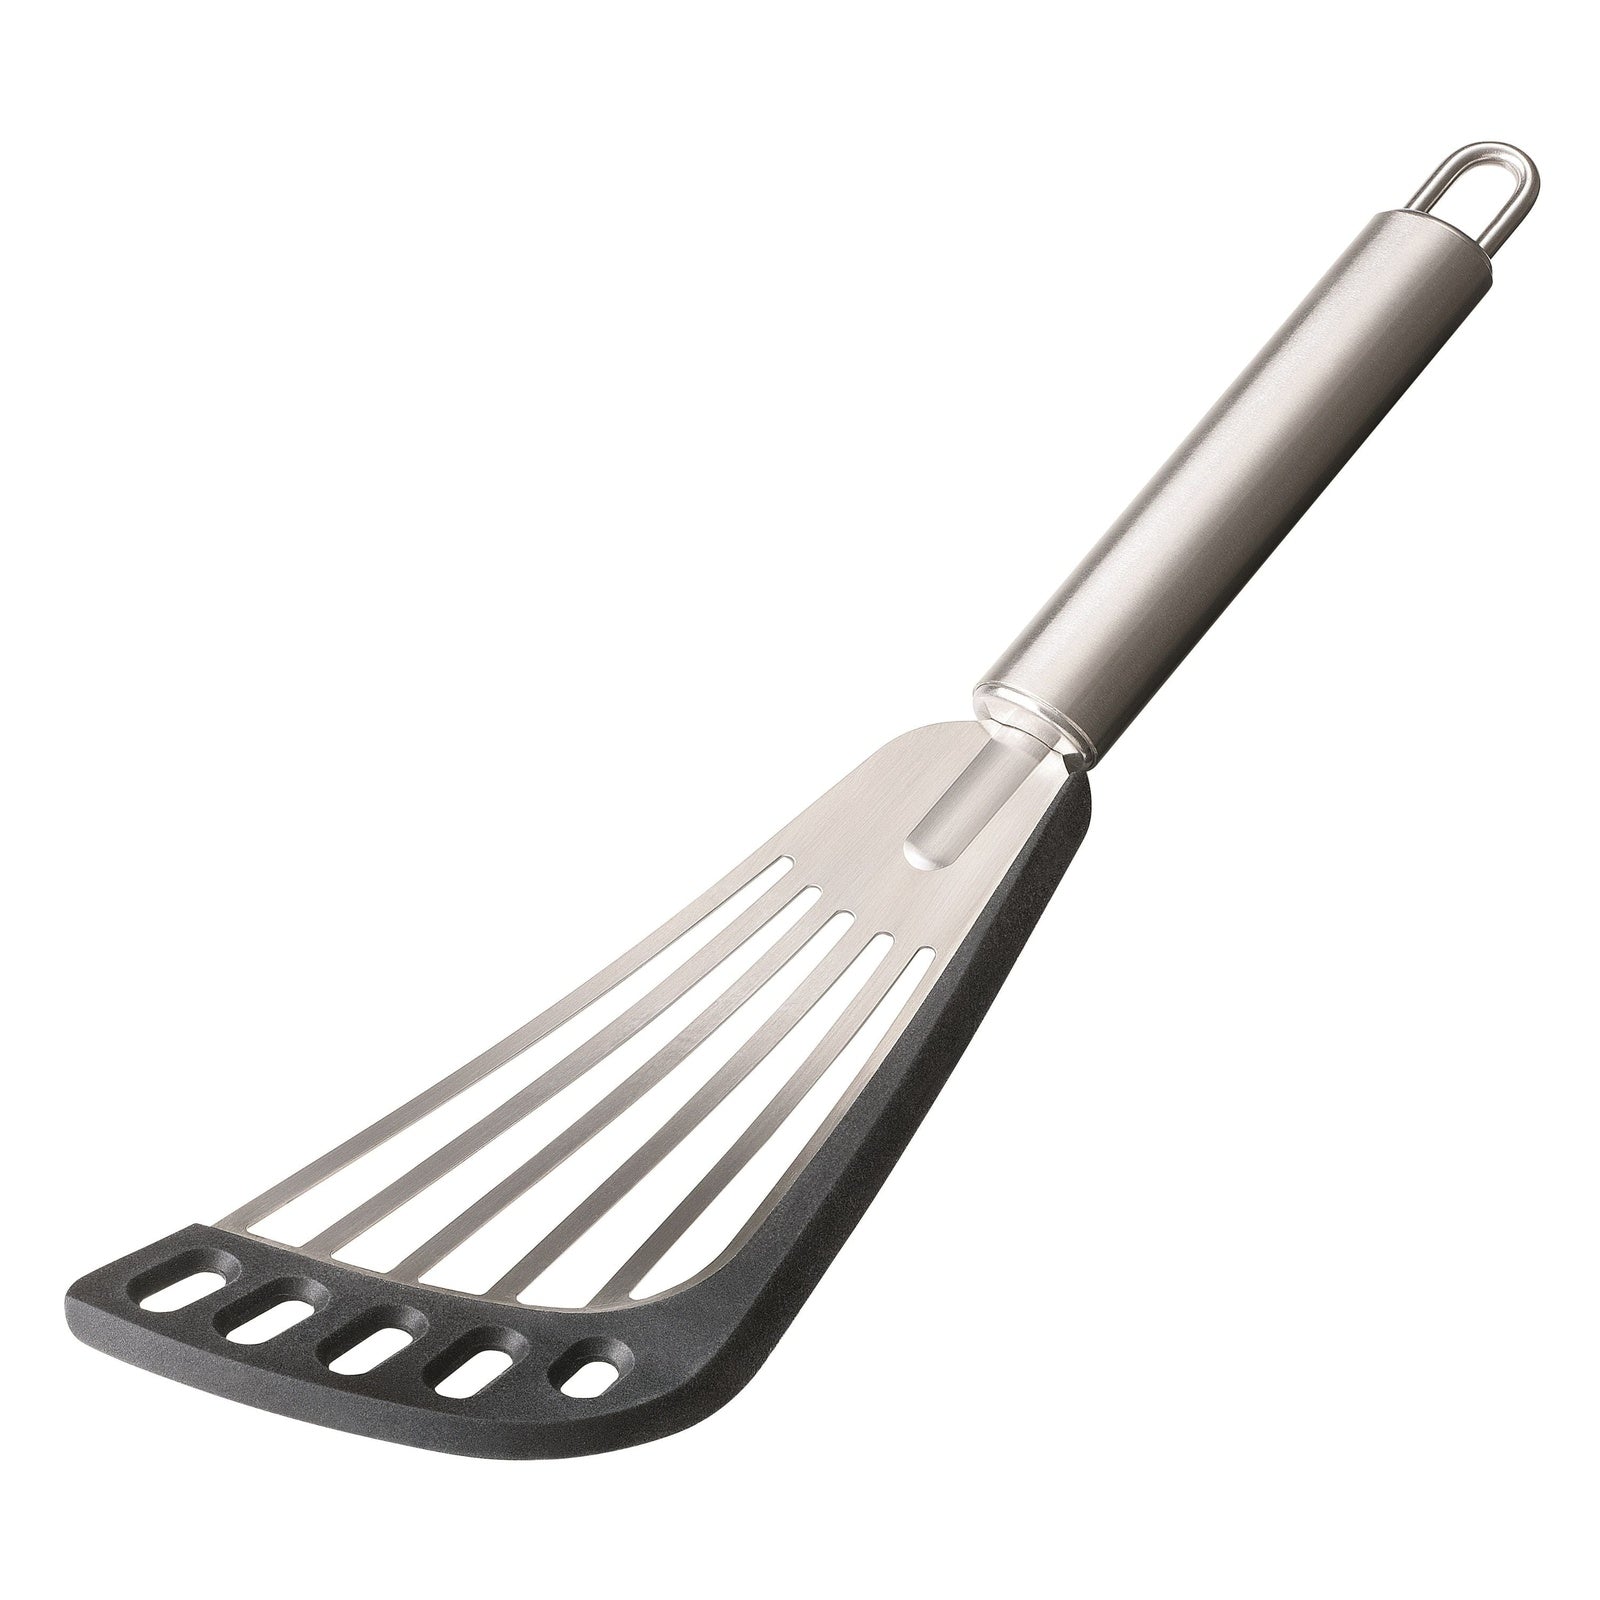 Spala Flexible Spatula, Stainless Steel, Grey - Kitchen Tools and Utensils